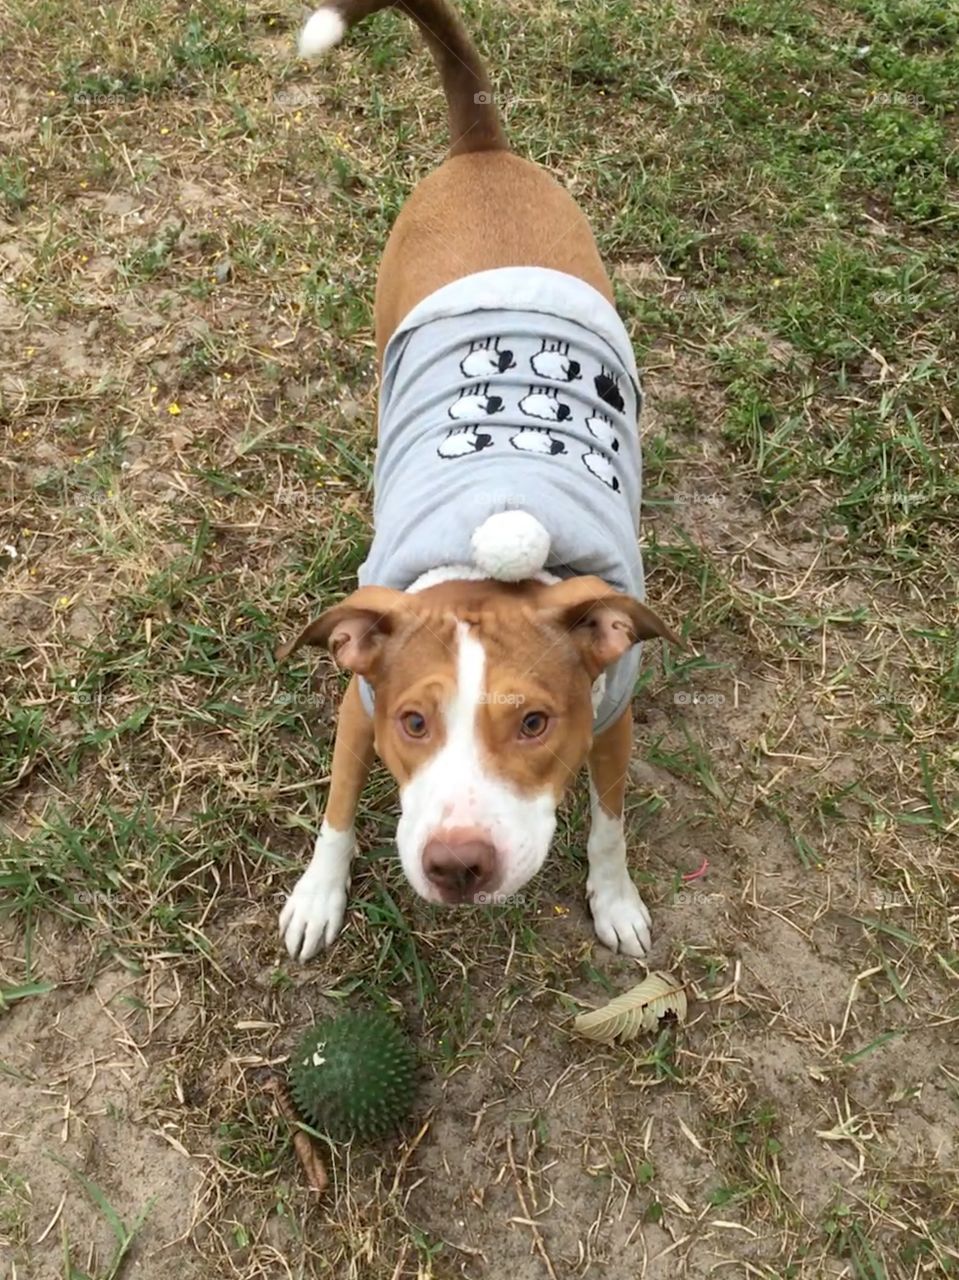 Red nose pitbull wearing a sweater rescue field